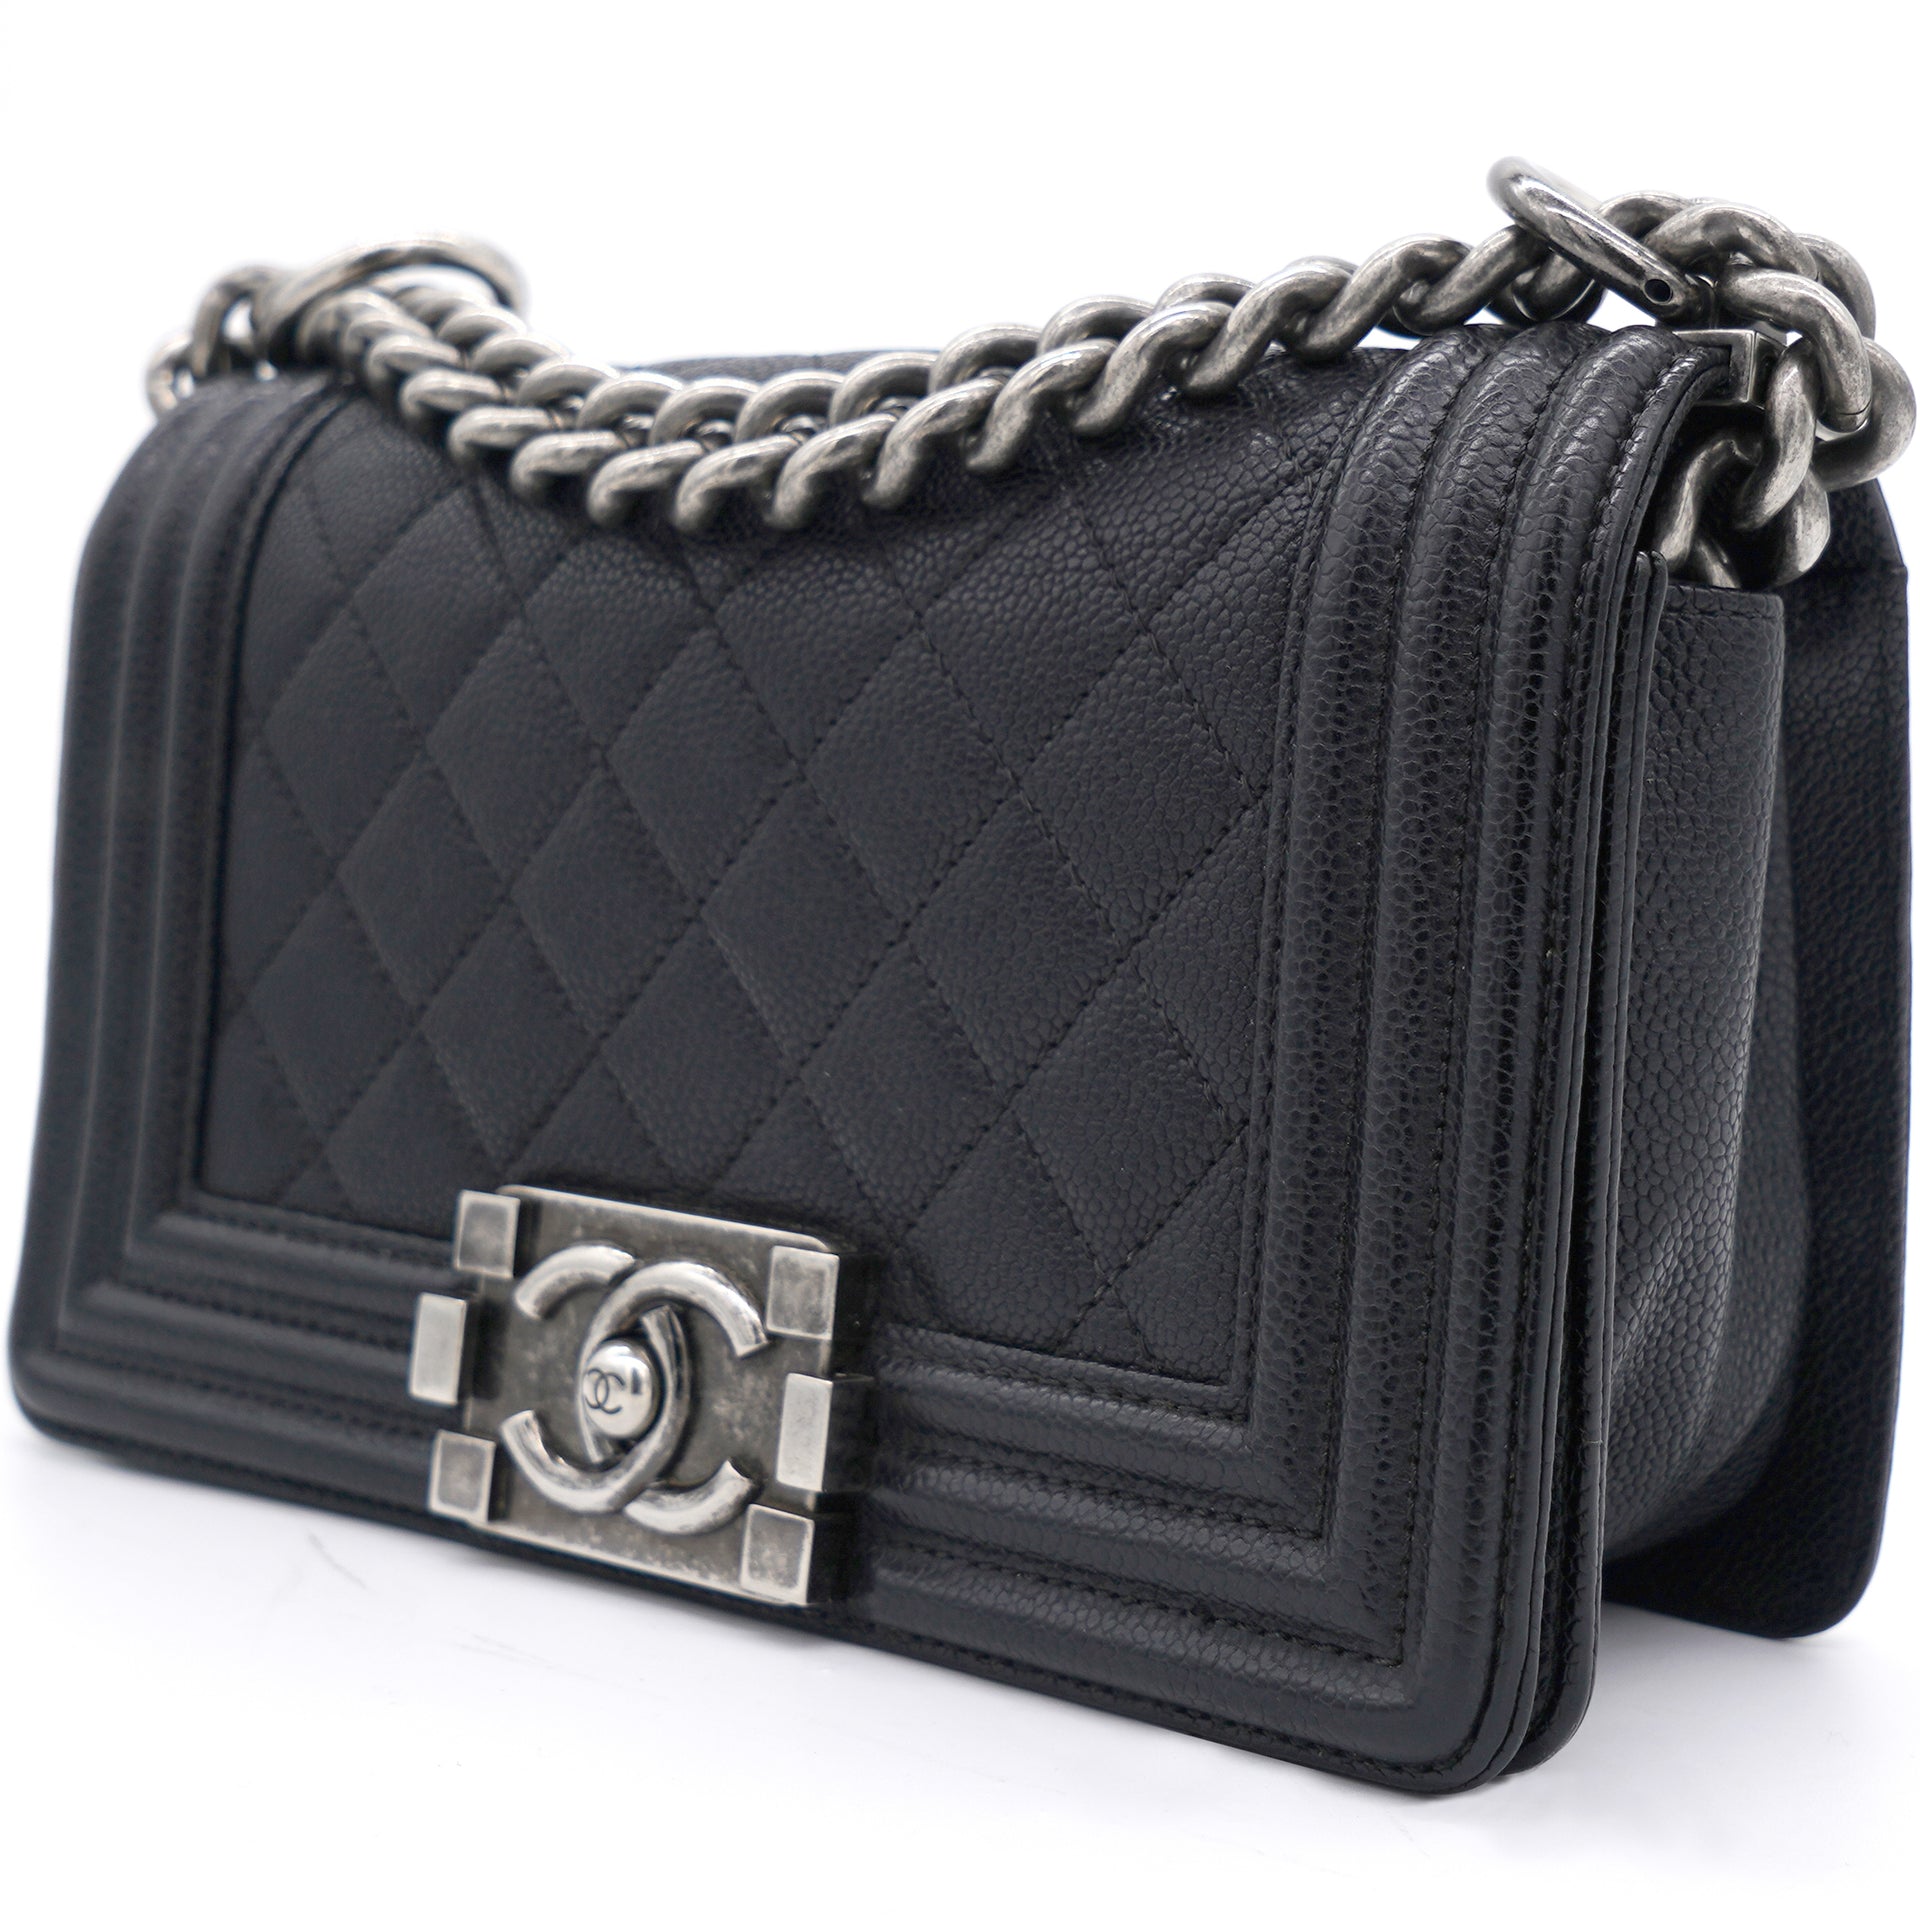 Black Quilted Caviar Leather Small Boy Flap Bag